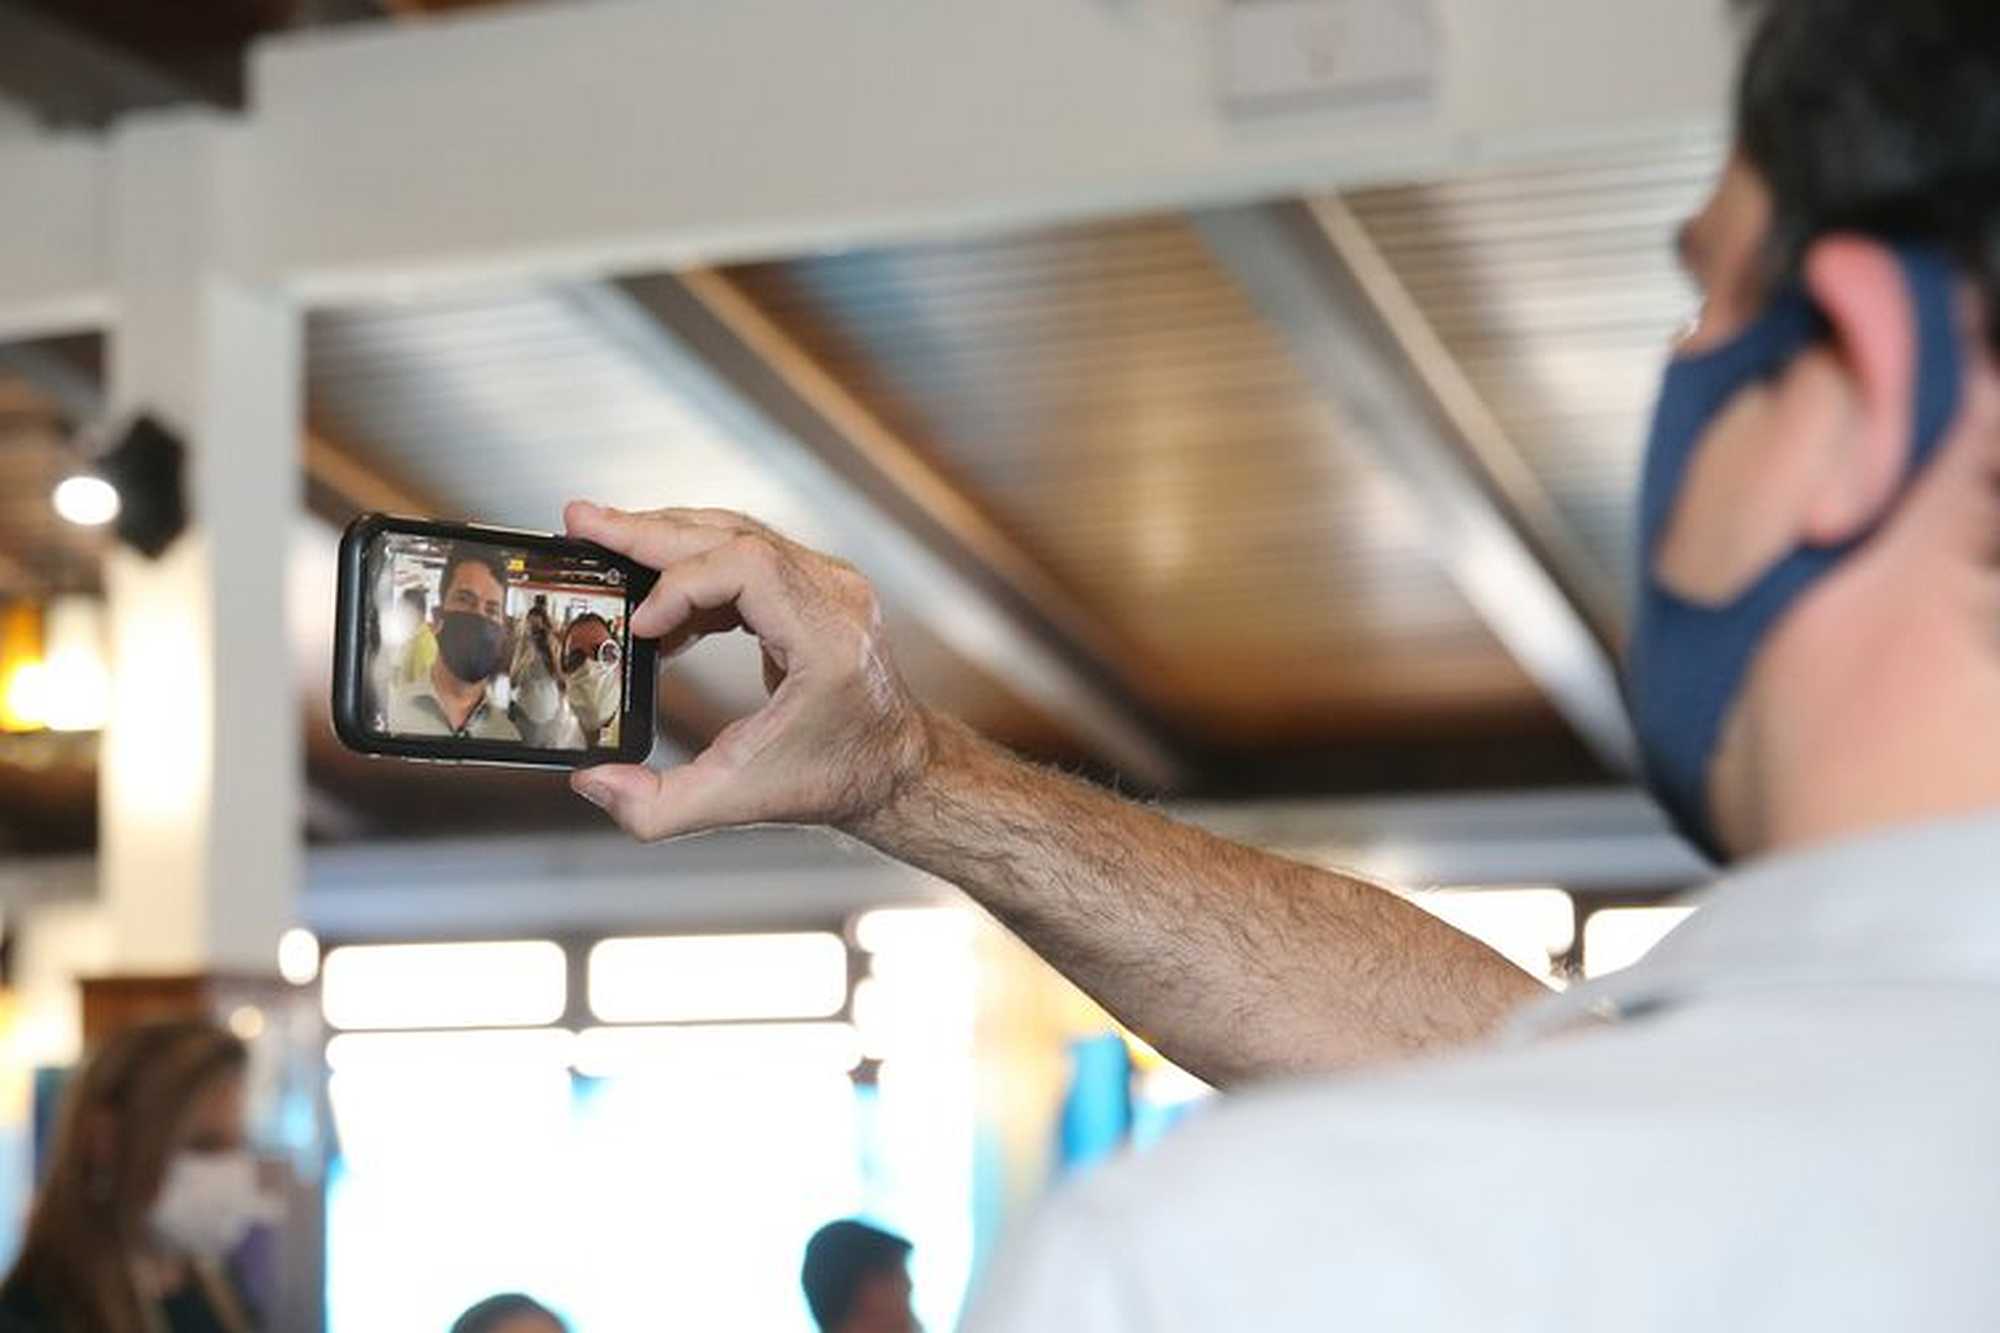 Former Minister of Justice and Public Security and Federal Judge, Sergio Moro taking a selfie during his vote in Municipal Elections 2020 in Curitiba, Brazil, on Sunday 15 November 2020. | Geraldo Bubniak/ZUMA Wire/PA Images